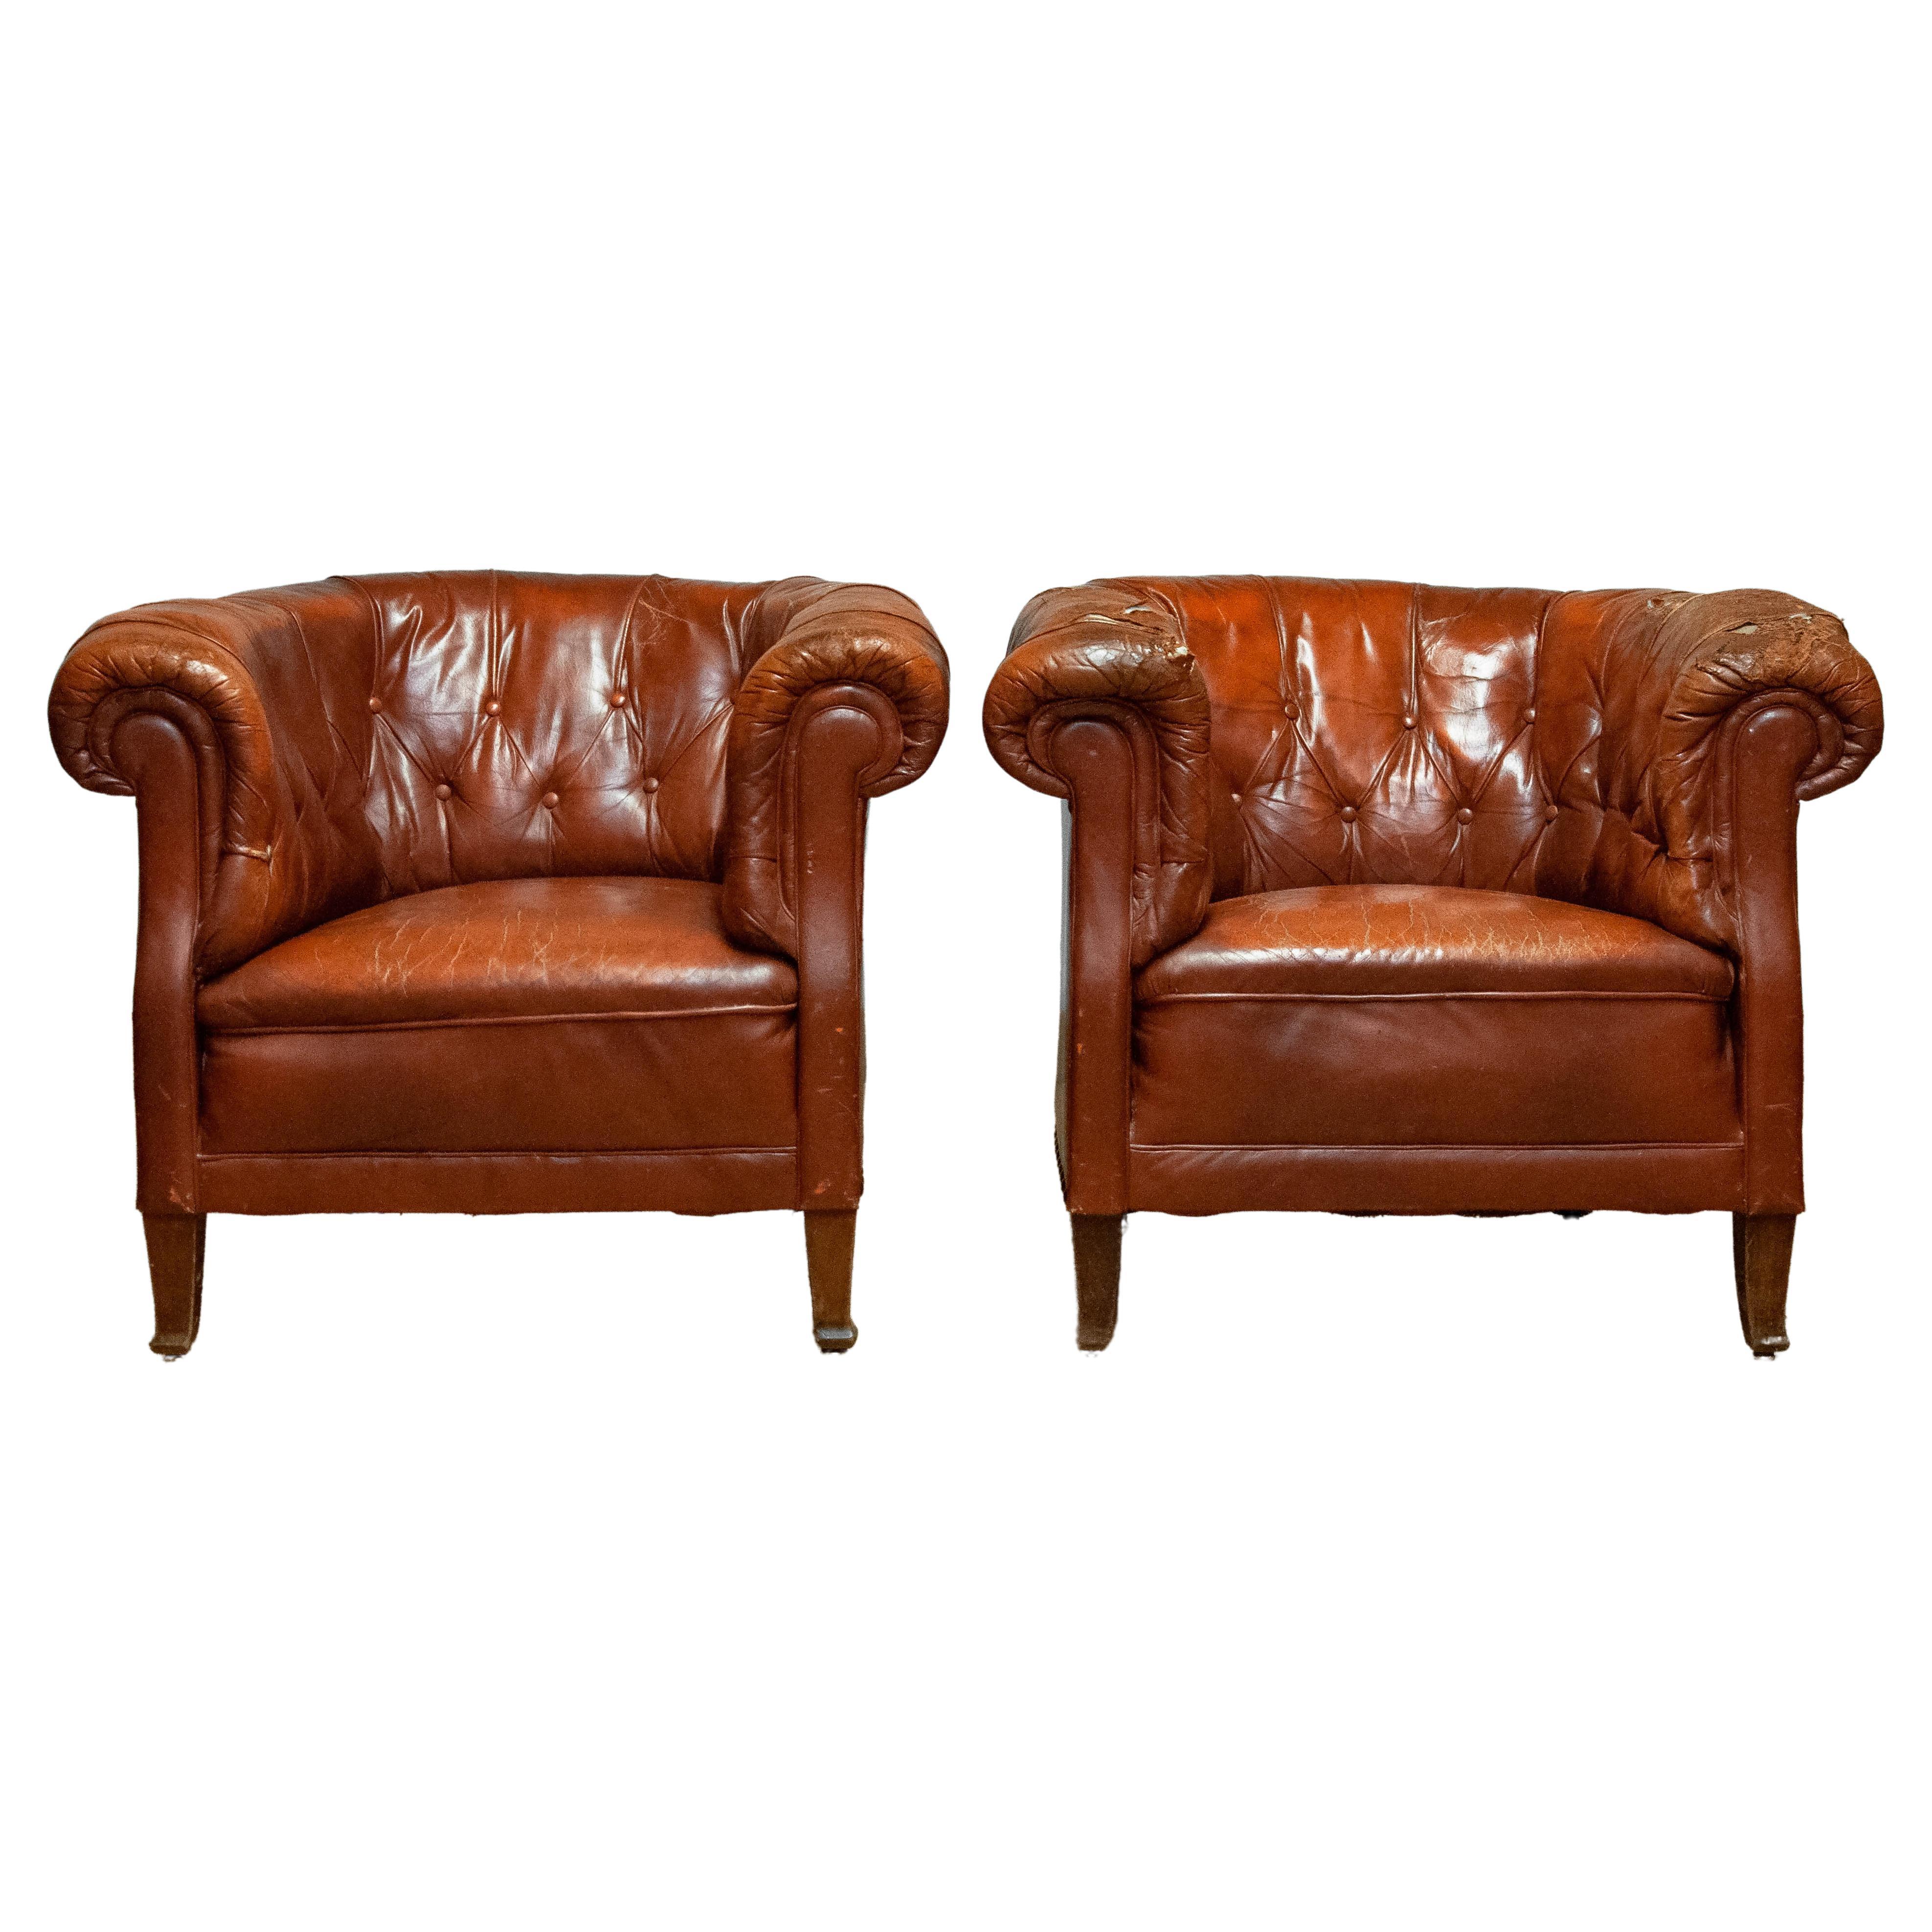 Handsome Solid Oak and Tufted Leather Club Chairs at 1stDibs